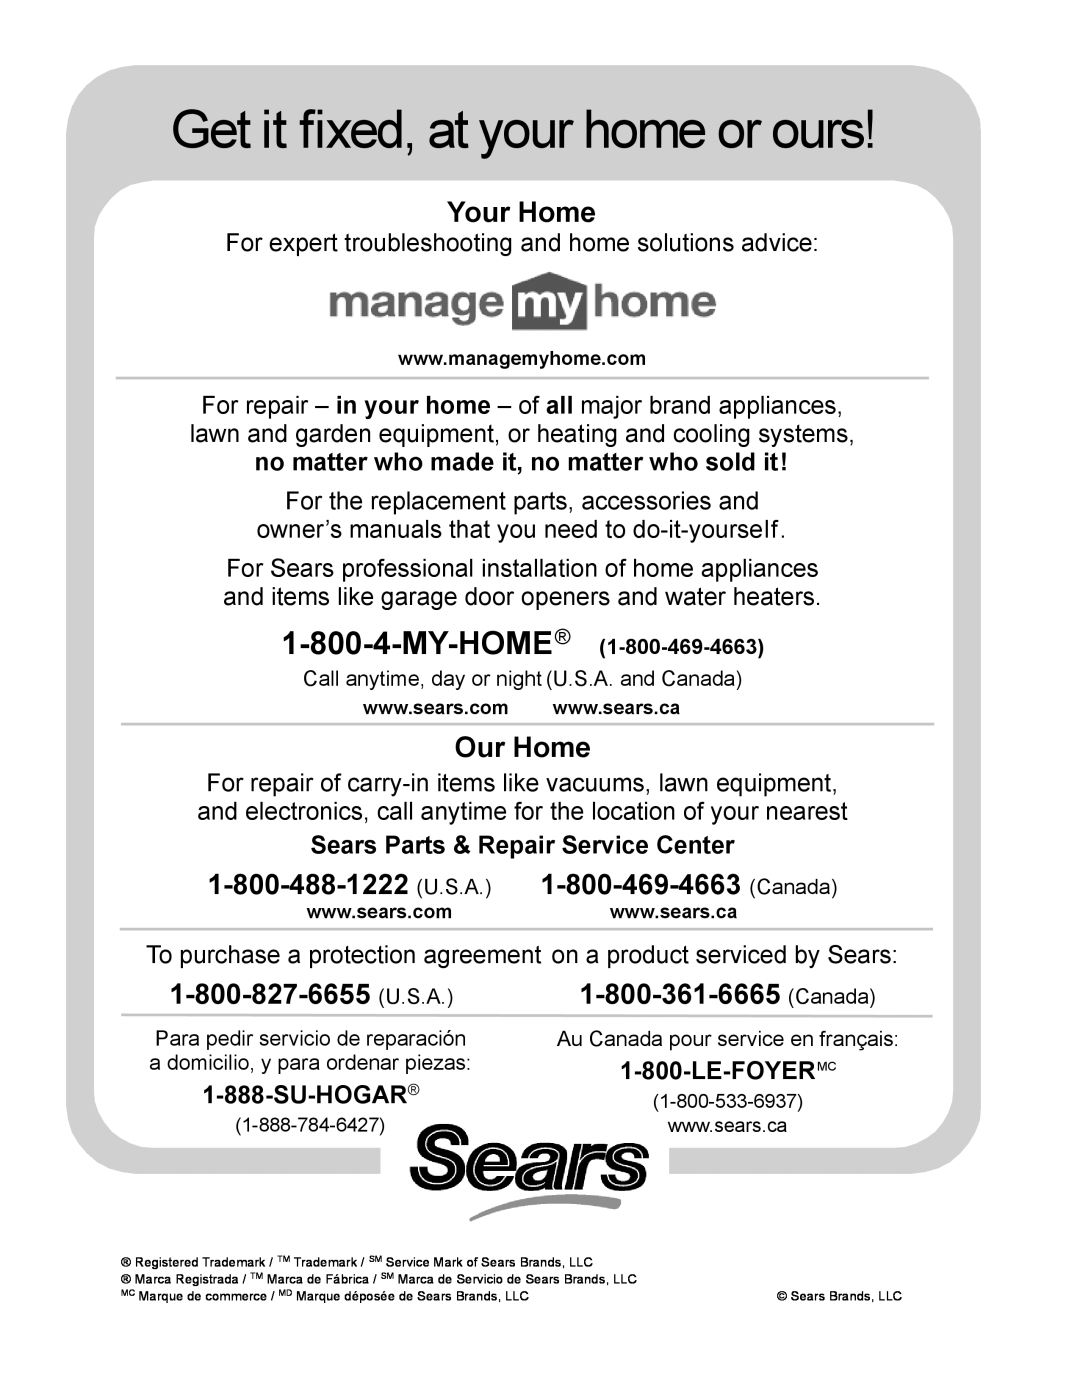 Kenmore 153.331572 Sears Parts & Repair Service Center, Su-Hogar, Le-Foyermc, Get it fixed, at your home or ours, Our Home 